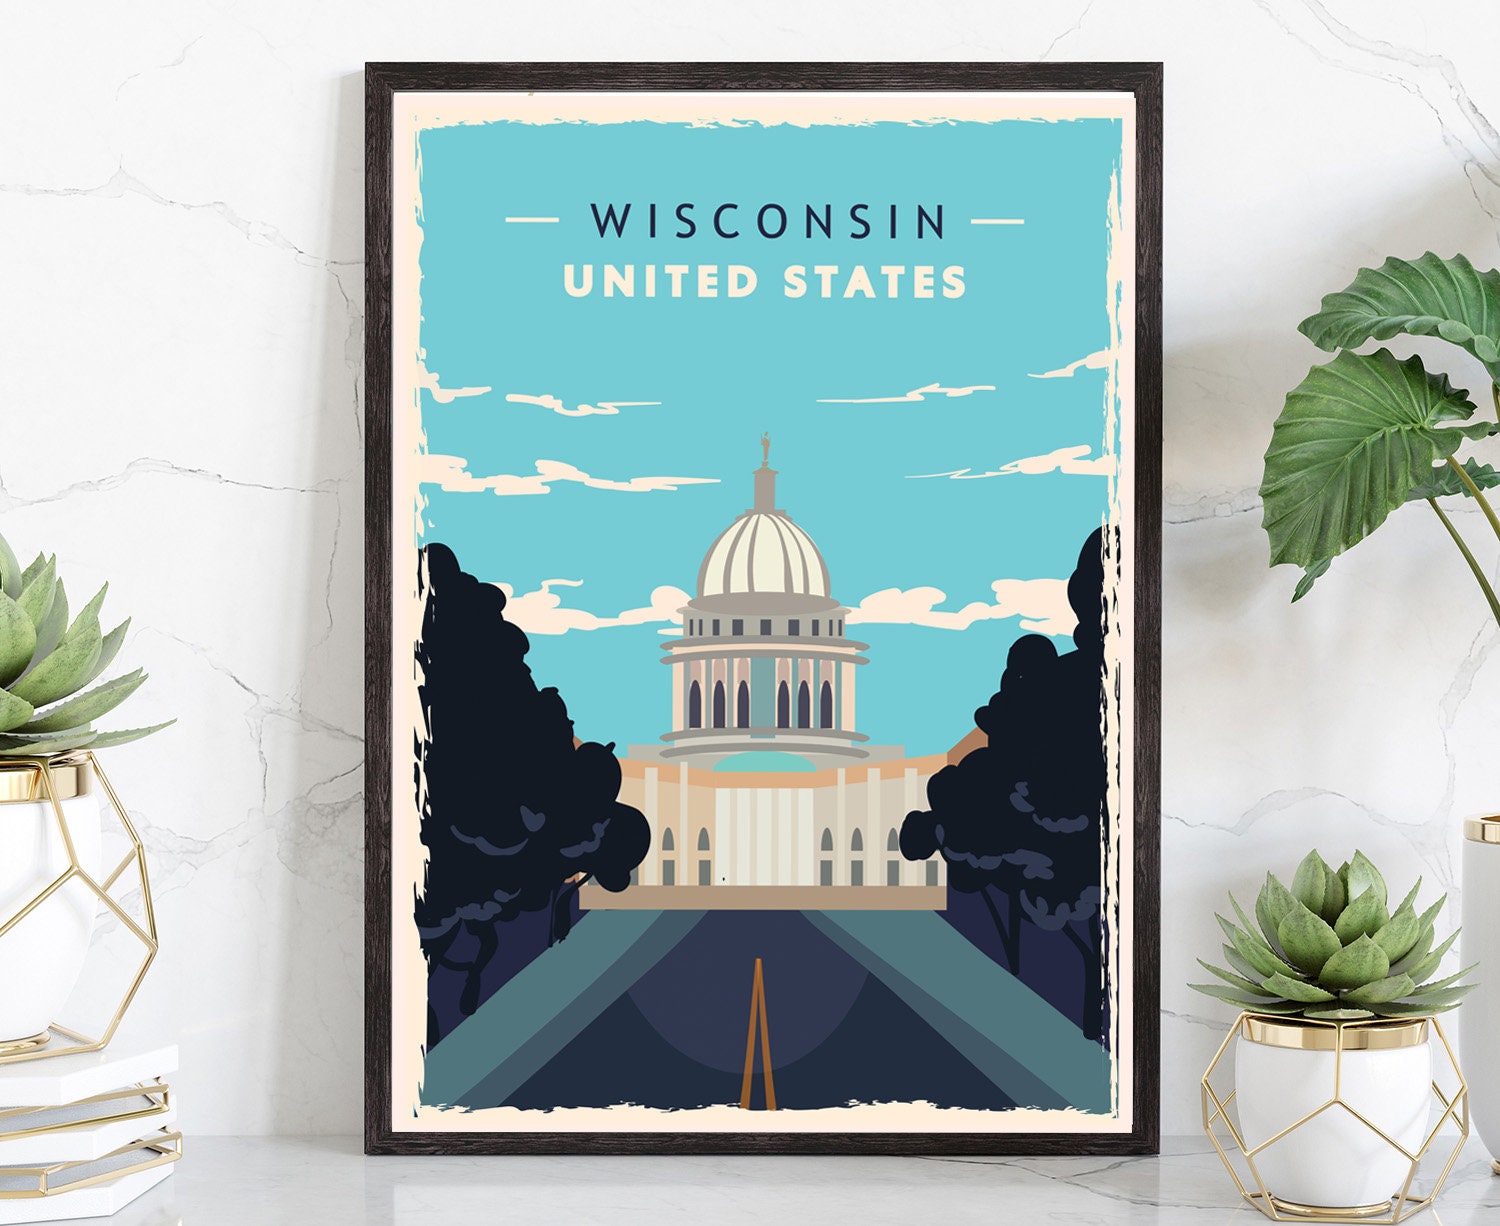 Retro Style Travel Poster, Wisconsin Vintage Rustic Poster Print, Home Wall Art, Office Wall Decor, Posters, Wisconsin, State Map Poster